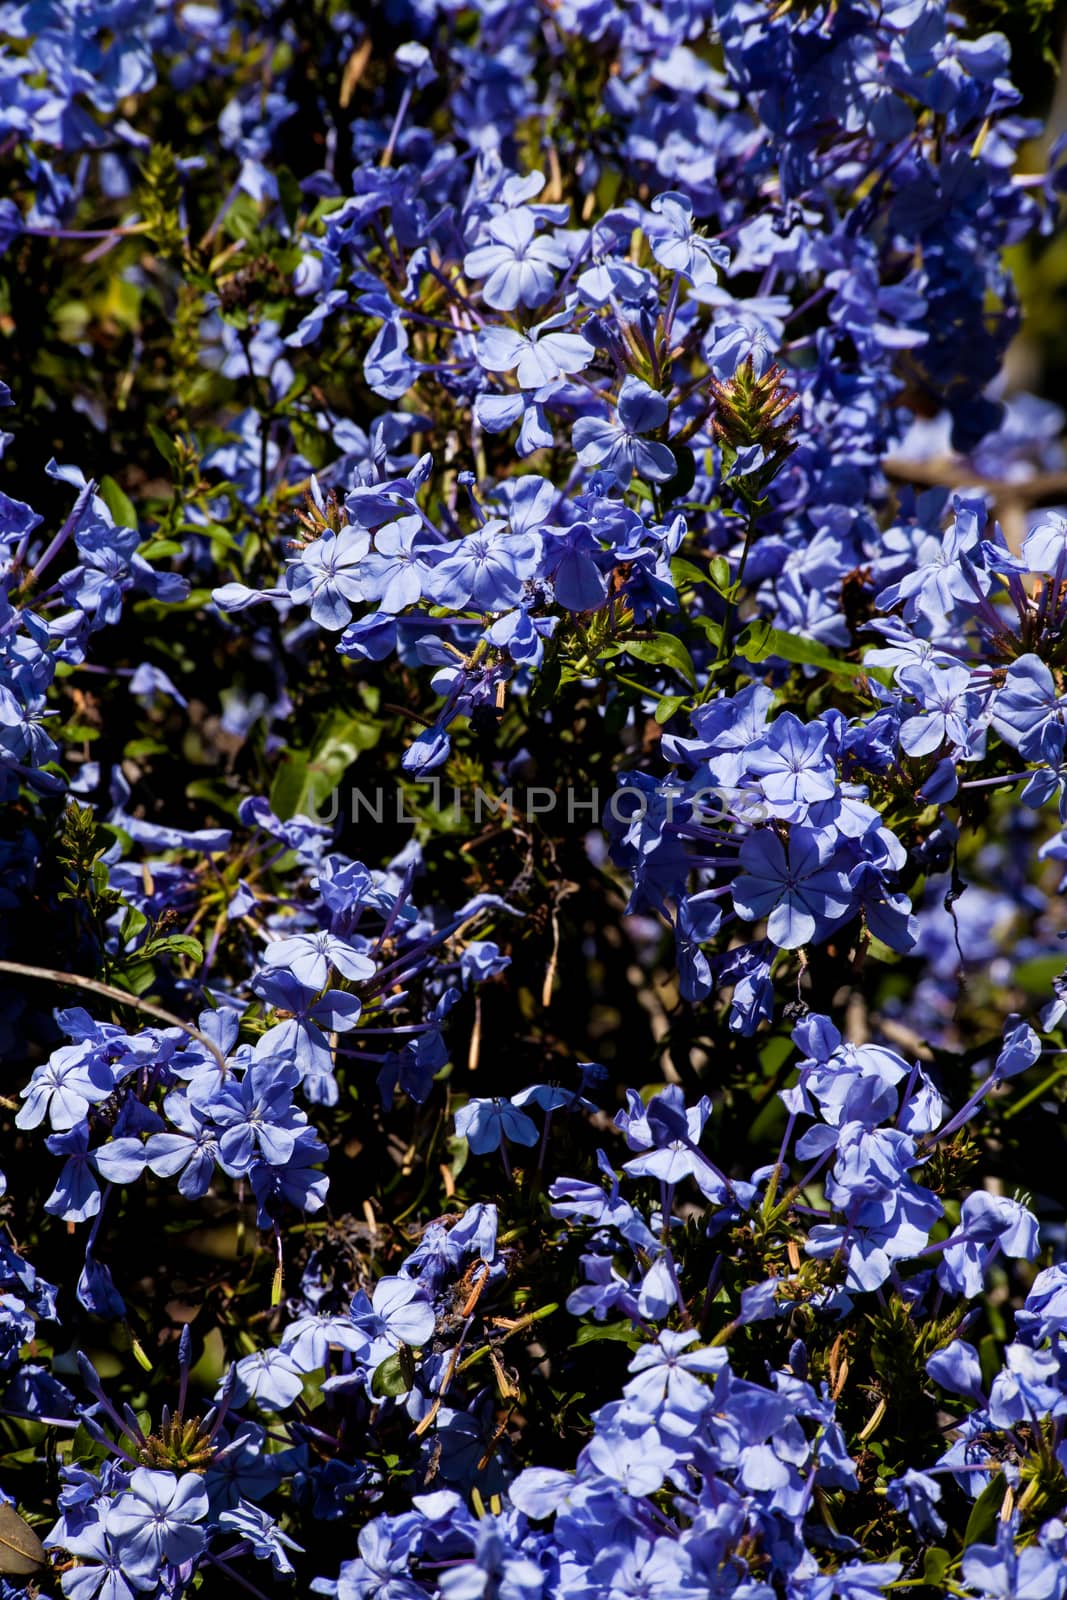 Cape Plumbago (Auriculata capensis) in flower as a blue Floral Background (IMG 3100)